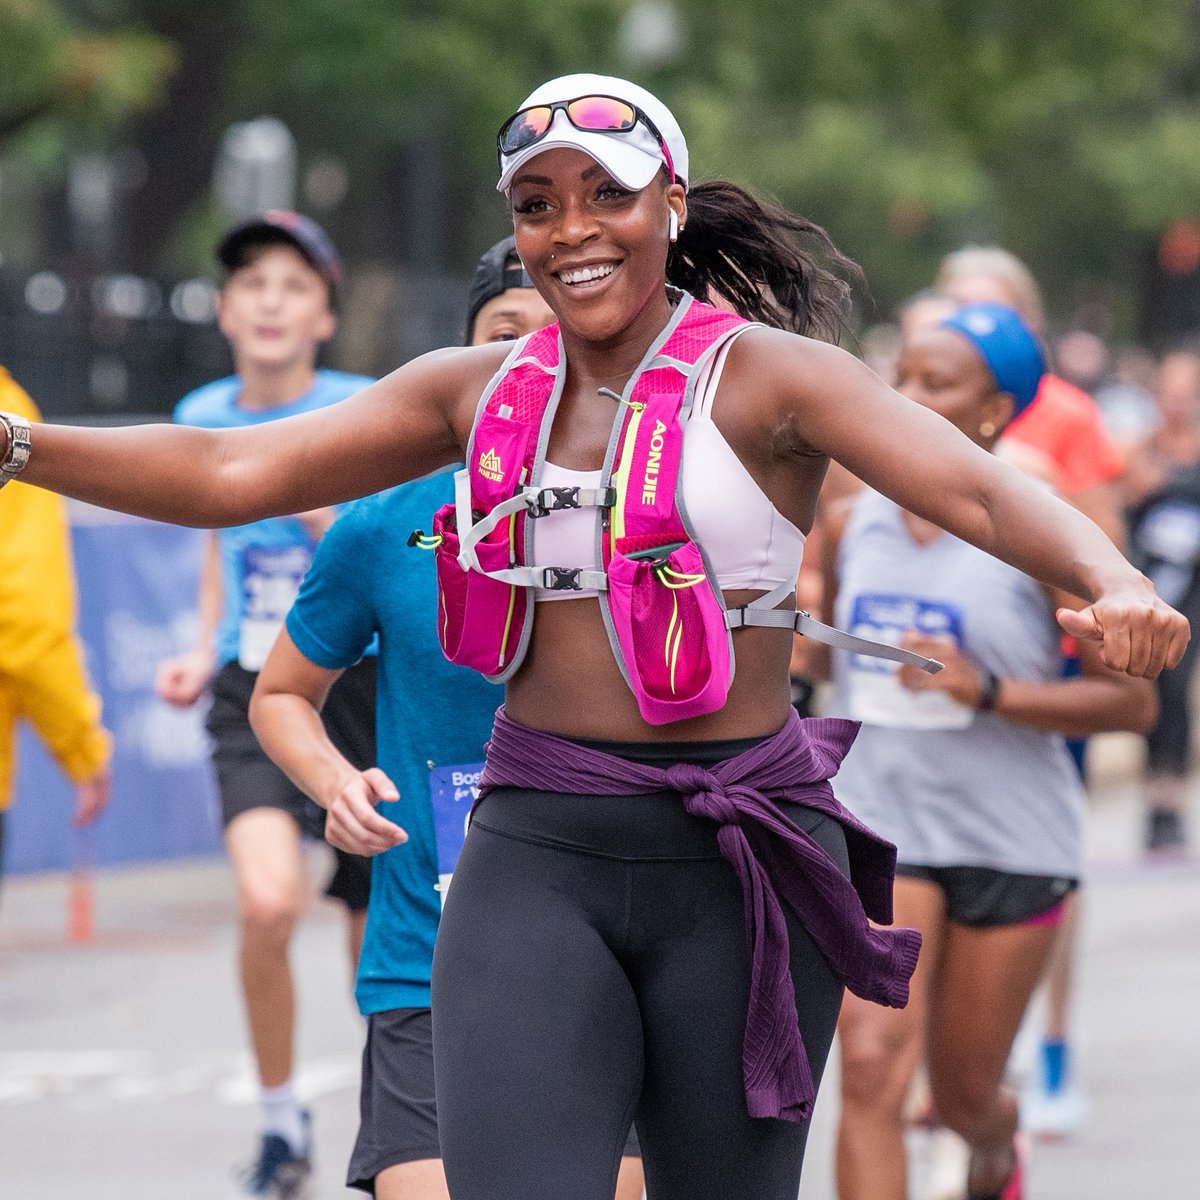 Smile because registration for the Boston 10K for Women opens at 10:00 a.m. tomorrow! If you want to run with thousands of women through historic Boston, find the registration link here: boston10kforwomen.com #boston10kforwomen #running #womensrunningcommunity